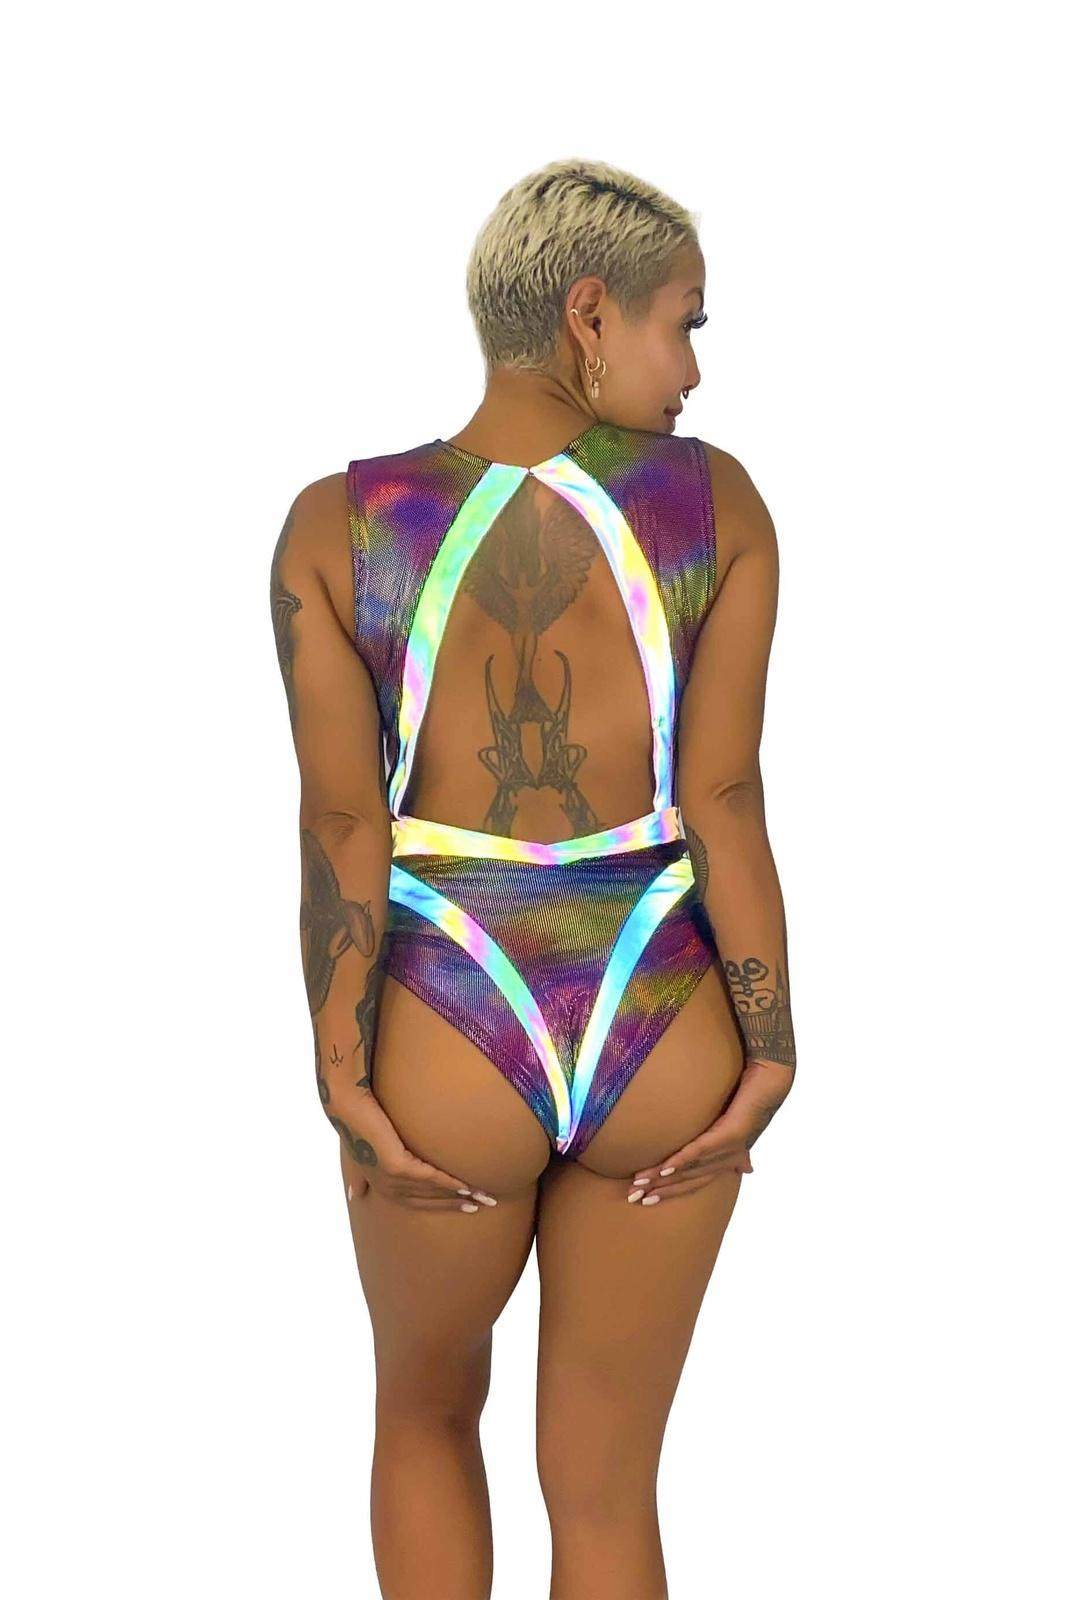 Oracle Rainbow Reflective Rave Bodysuit from Love Khaos Festival Clothing Brand.